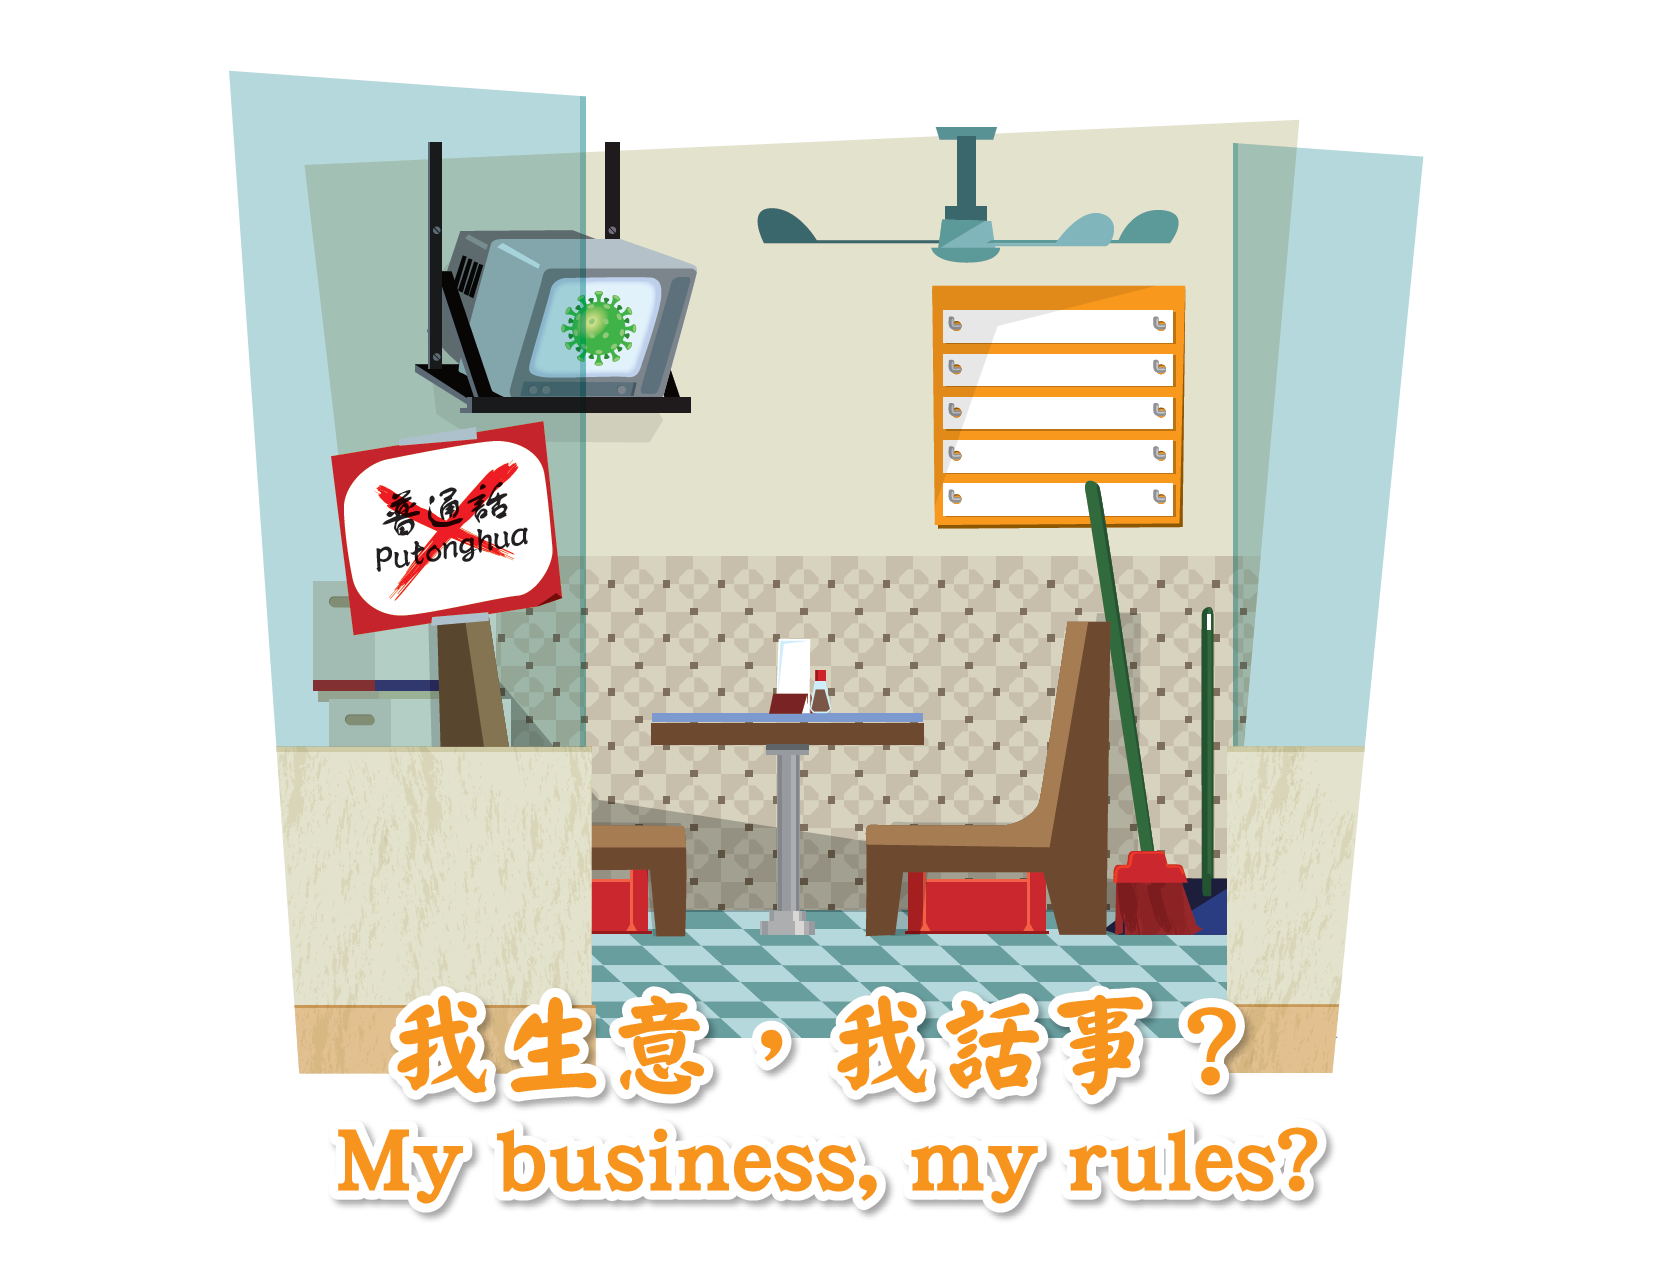 Illustrated image of a restaurant with the text, “My business, my rules?”